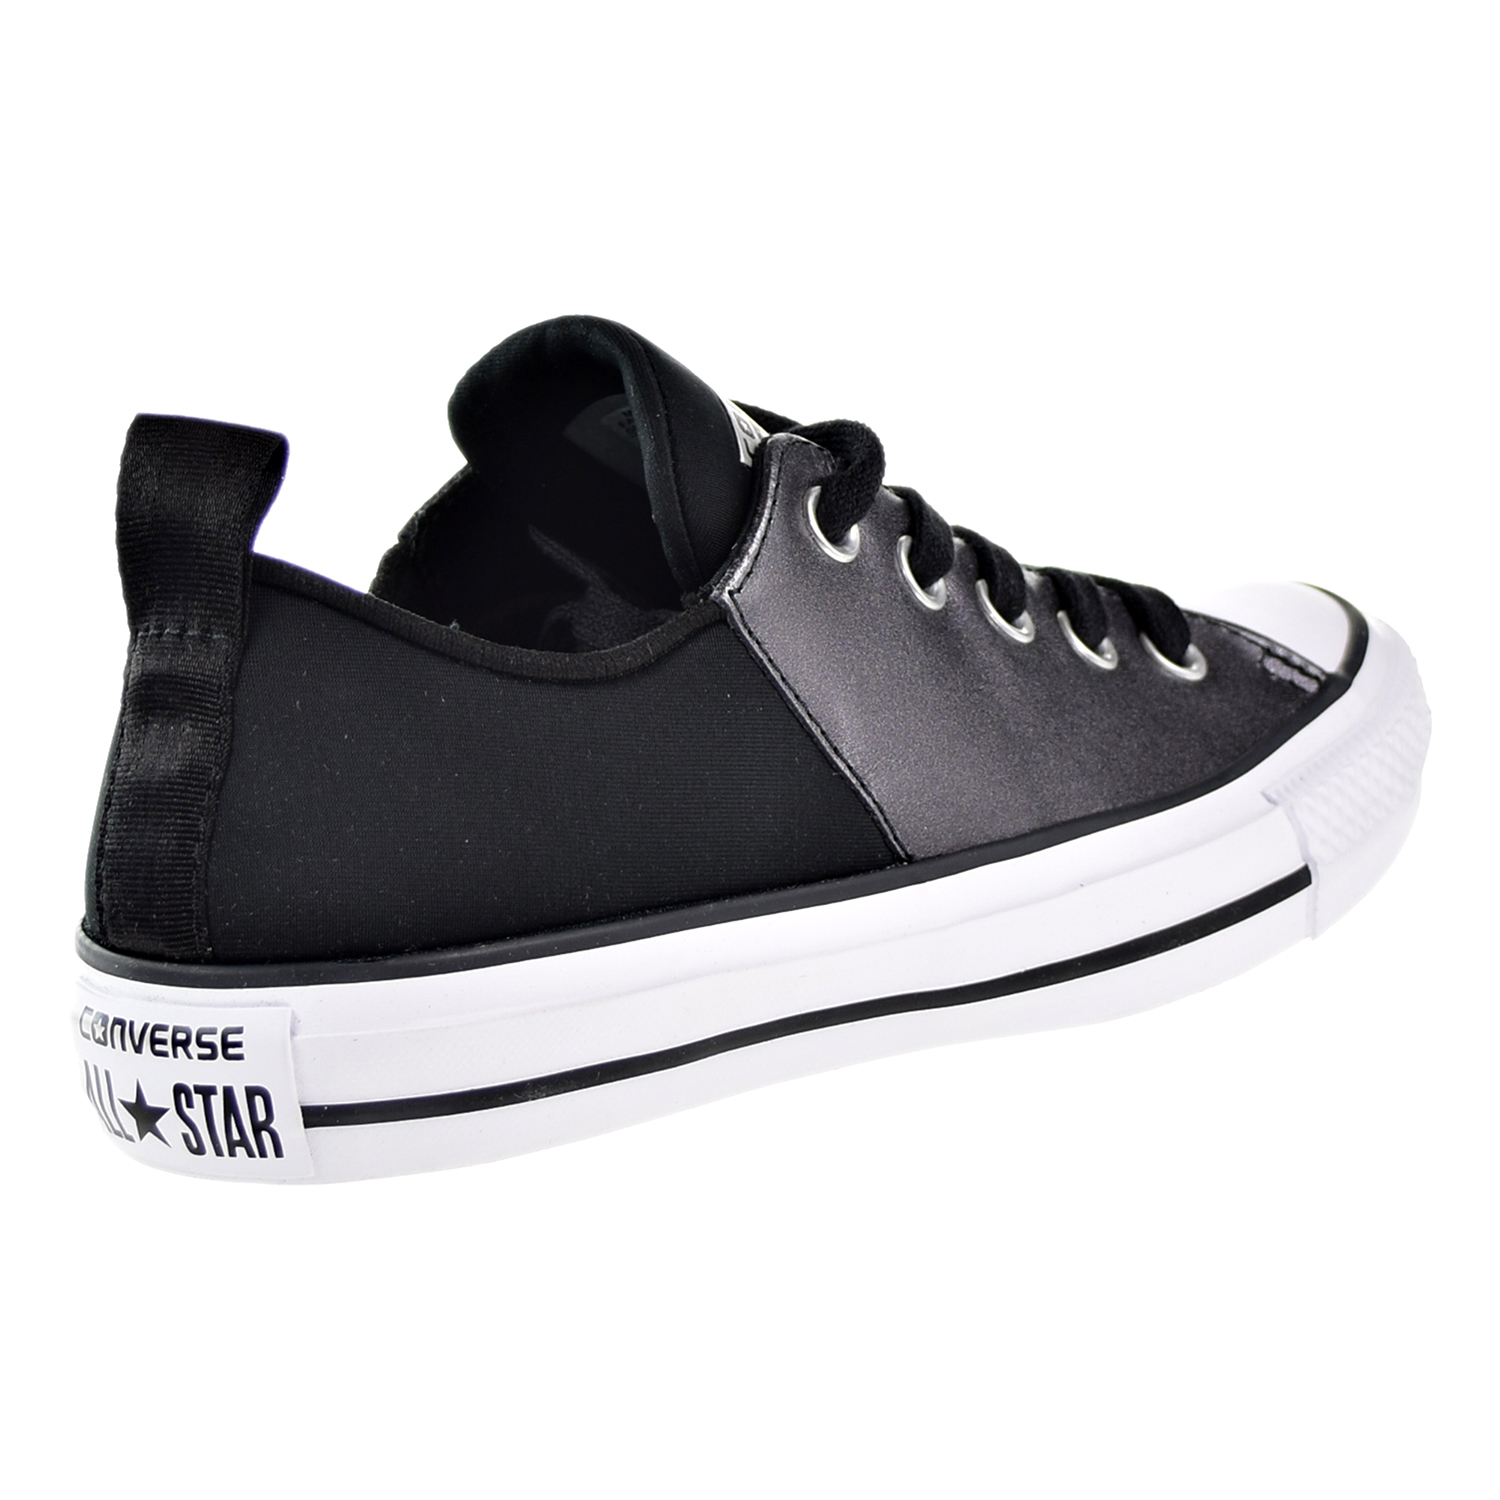 Converse Chuck Taylor All Star Sloane Glam Leather Low Top Women's Shoe Black/White555835c - image 3 of 6